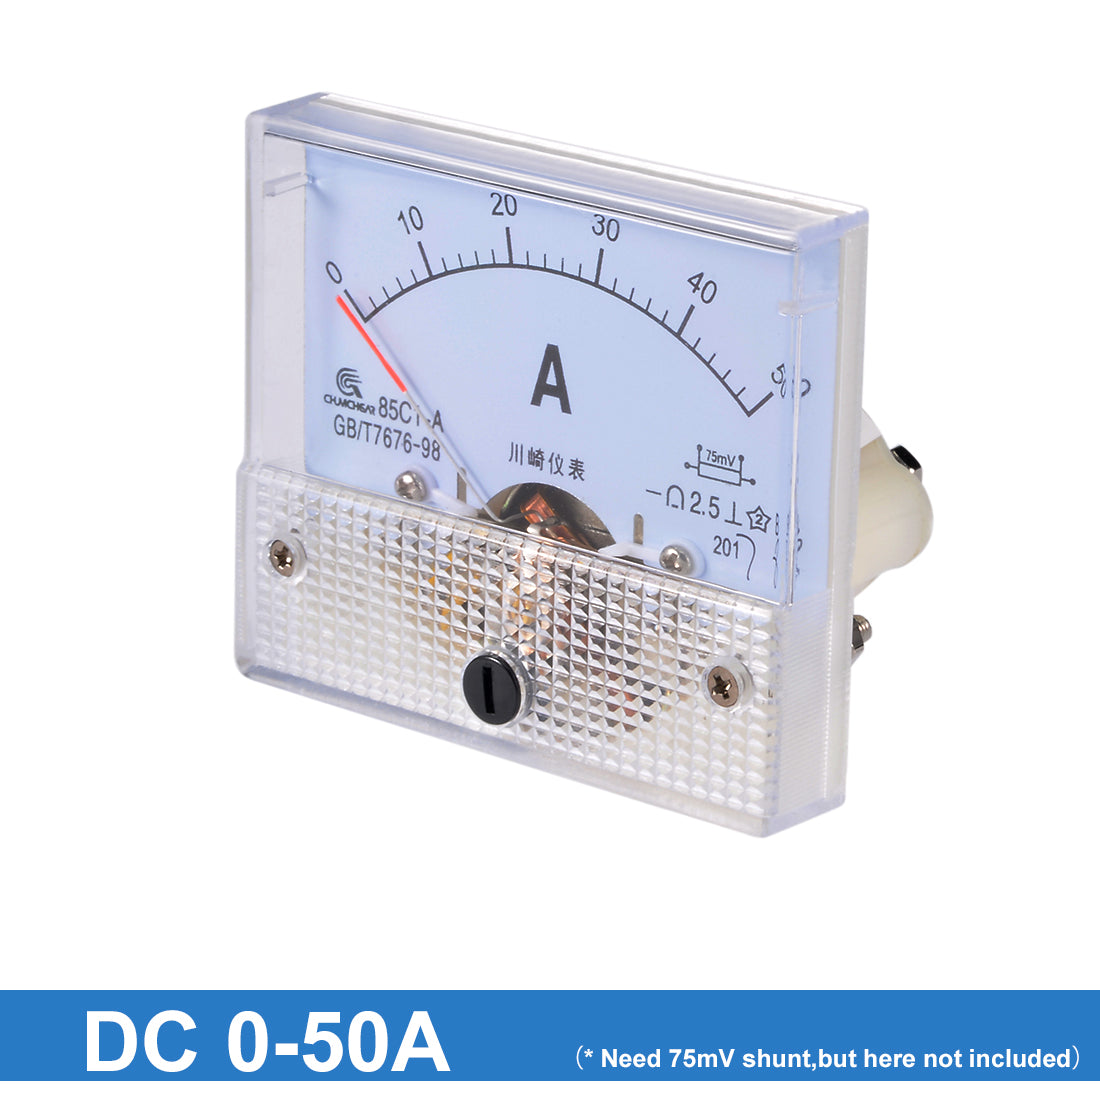 uxcell Uxcell 85C1-A Analog Current Panel Meter DC 50A Ammeter for Circuit Testing Ampere Tester Gauge 1 PCS